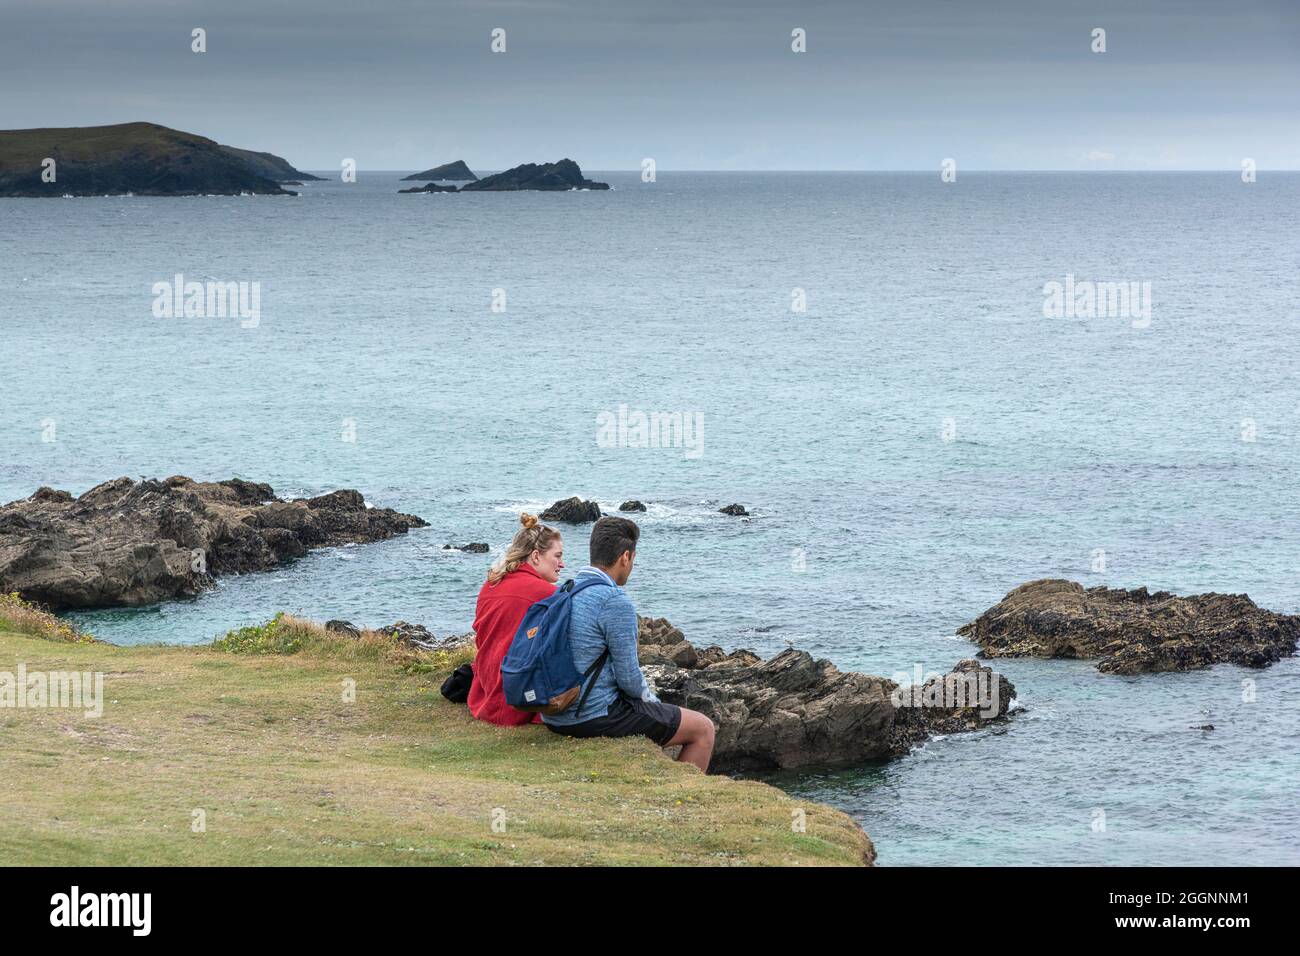 A couple on holiday sitting together on the coast in Newquay overlooking the Celtic Sea. Stock Photo